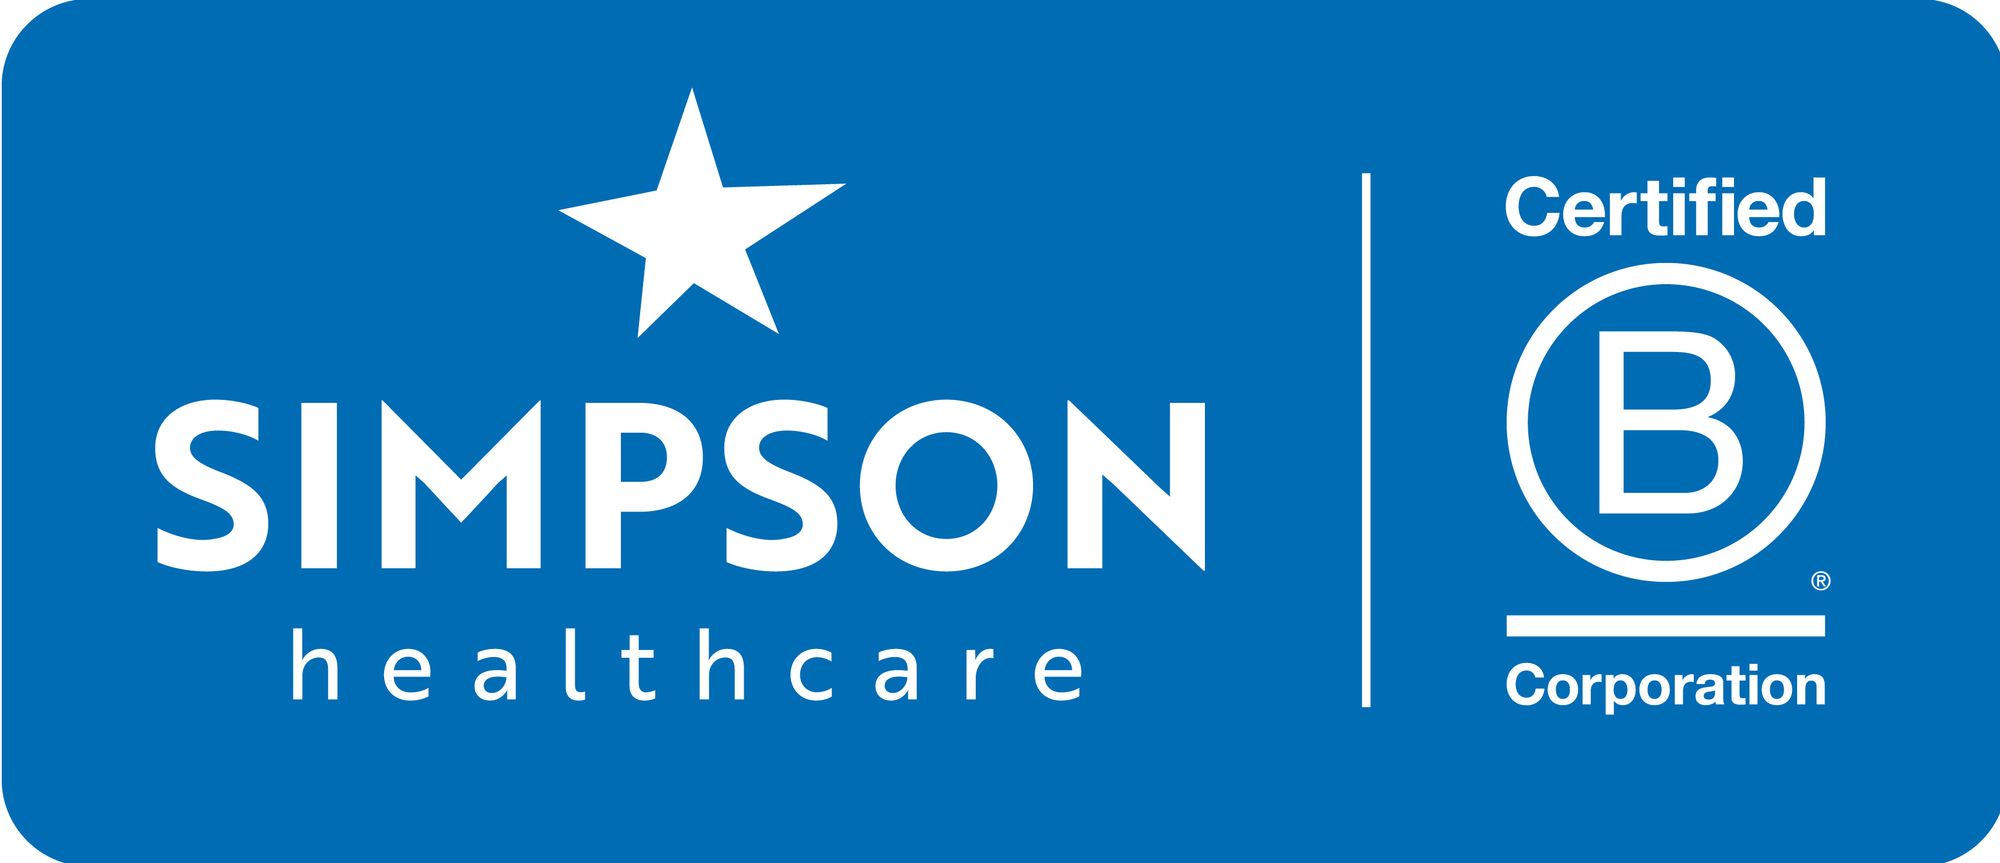 Simpson Healthcare Was Just Made a Certified B Corporation!